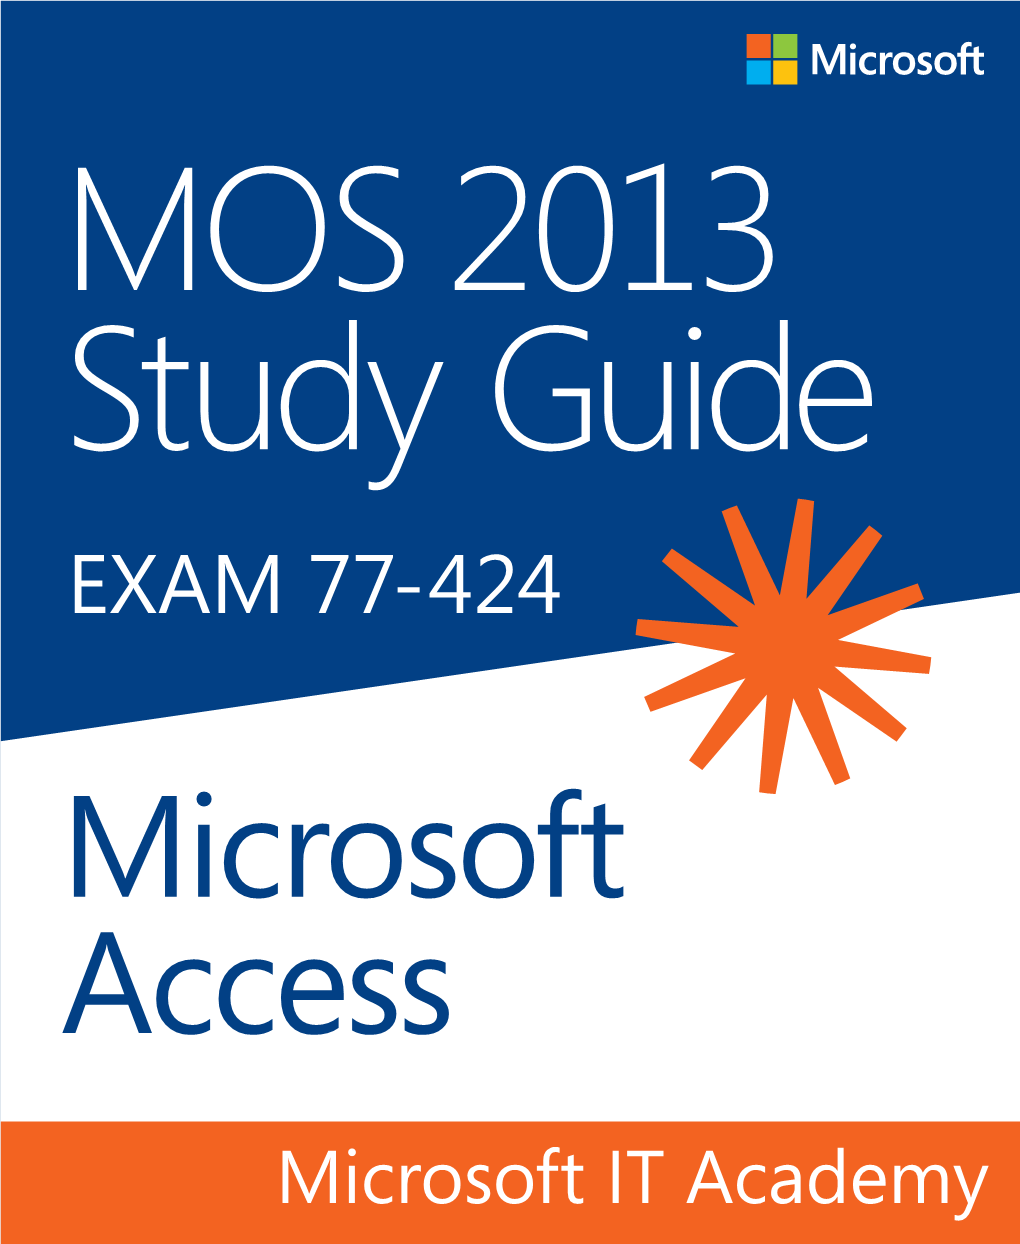 MOS 2013 Study Guide for Microsoft Access Ebook